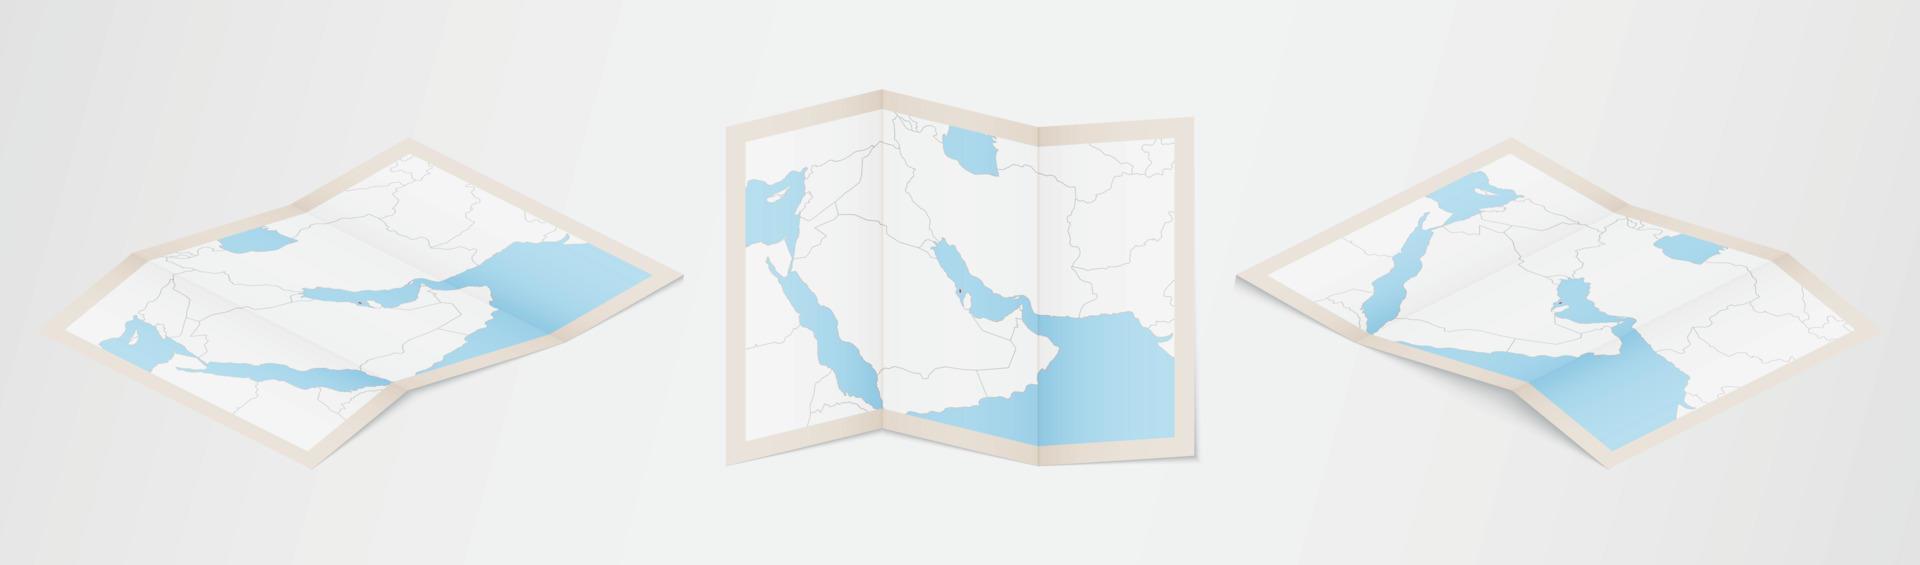 Folded map of Bahrain in three different versions. vector